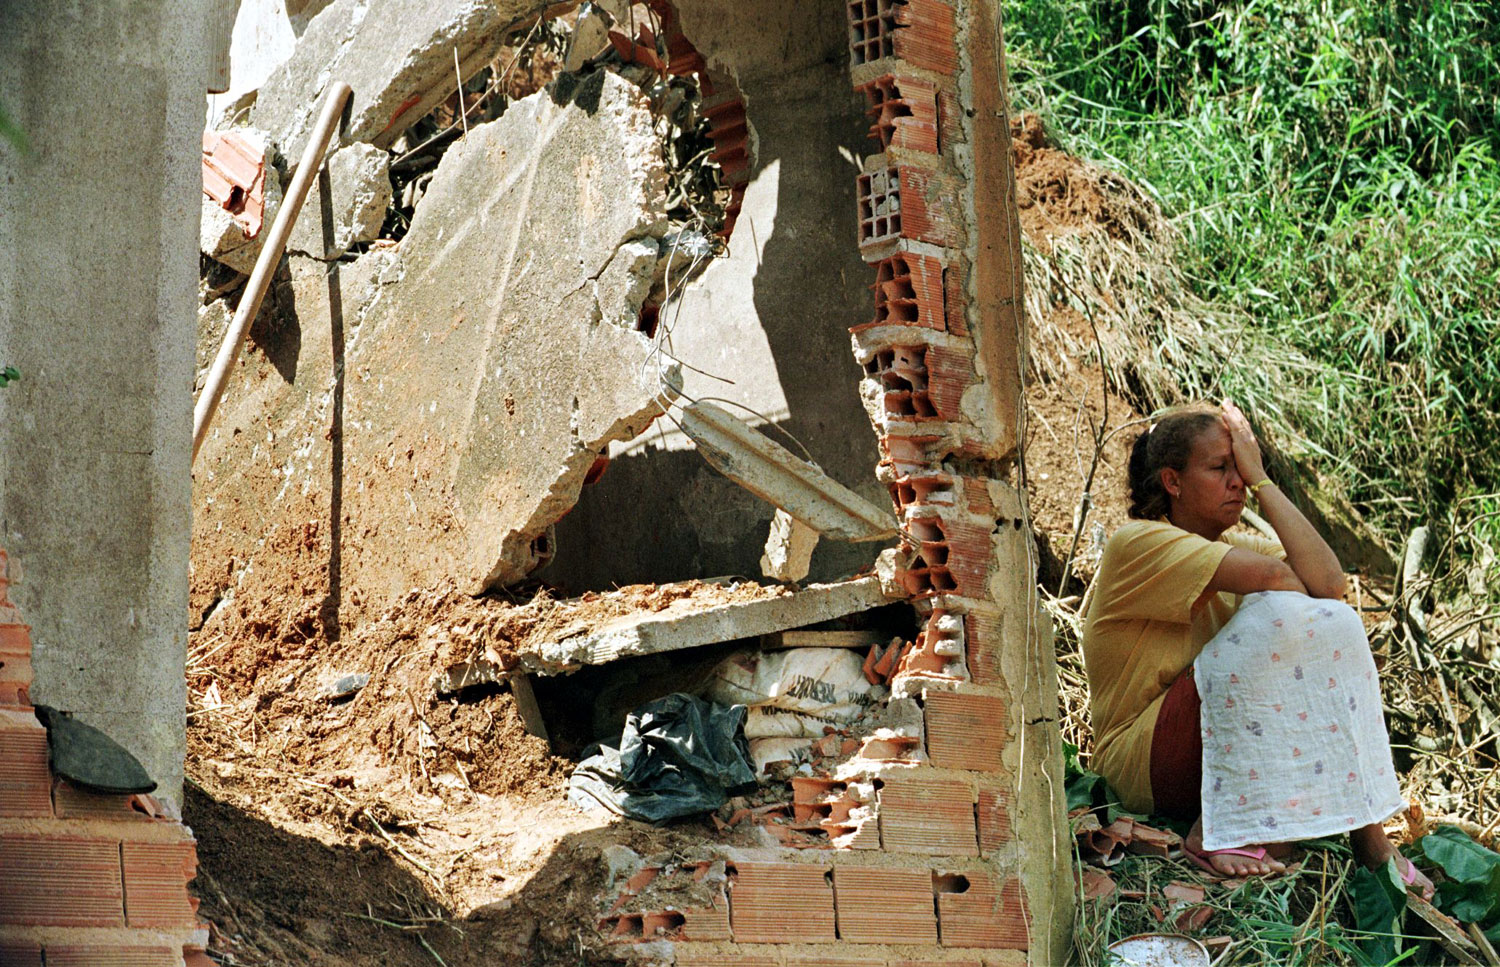 A resident  grieves while sitting by the ruins of her neighbor' house s on March 3, 1999 after it collapsed killing one person during a landslide triggered by recent torrential rains. Some 28 people have died in Sao Paulo since the beginning of 1999 as a direct consequence of the disastrous weather caused by the weather phenomenon known as  La Nina.